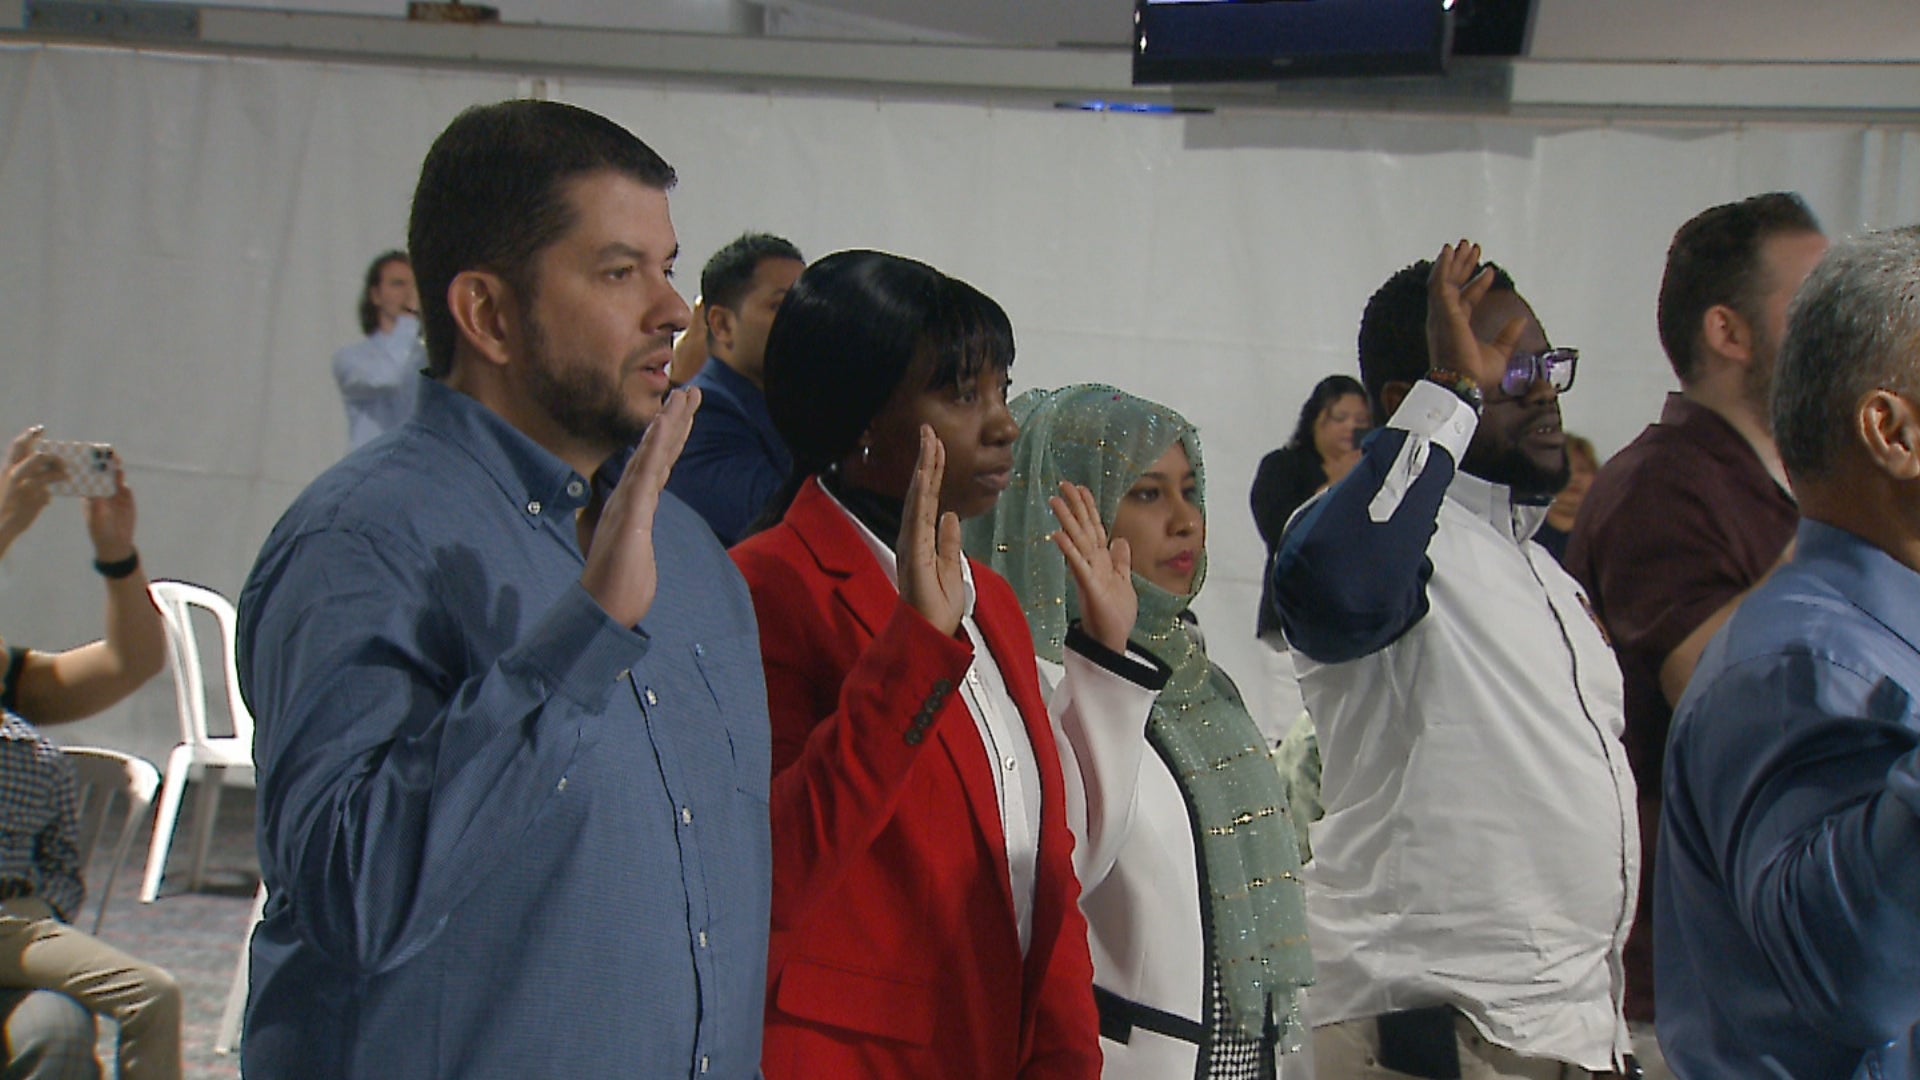 33 become US citizens in ceremony at Indianapolis Motor Speedway